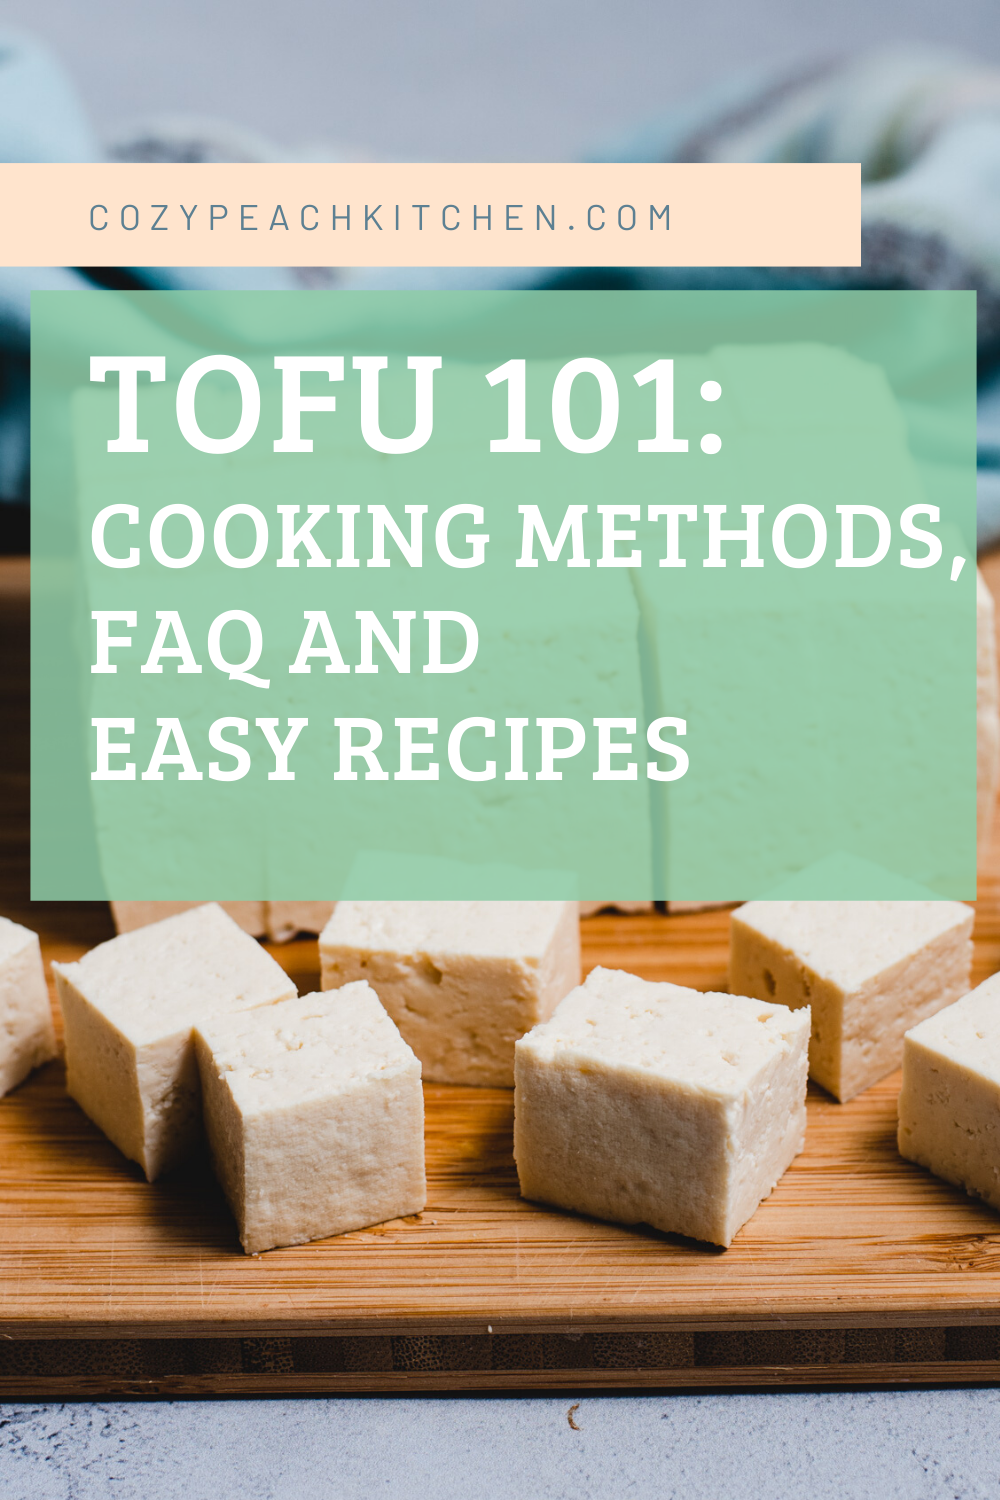 Image of cubed tofu with overlay that says "Tofu 101: Cooking Methods, FAQ and easy recipes" and website address